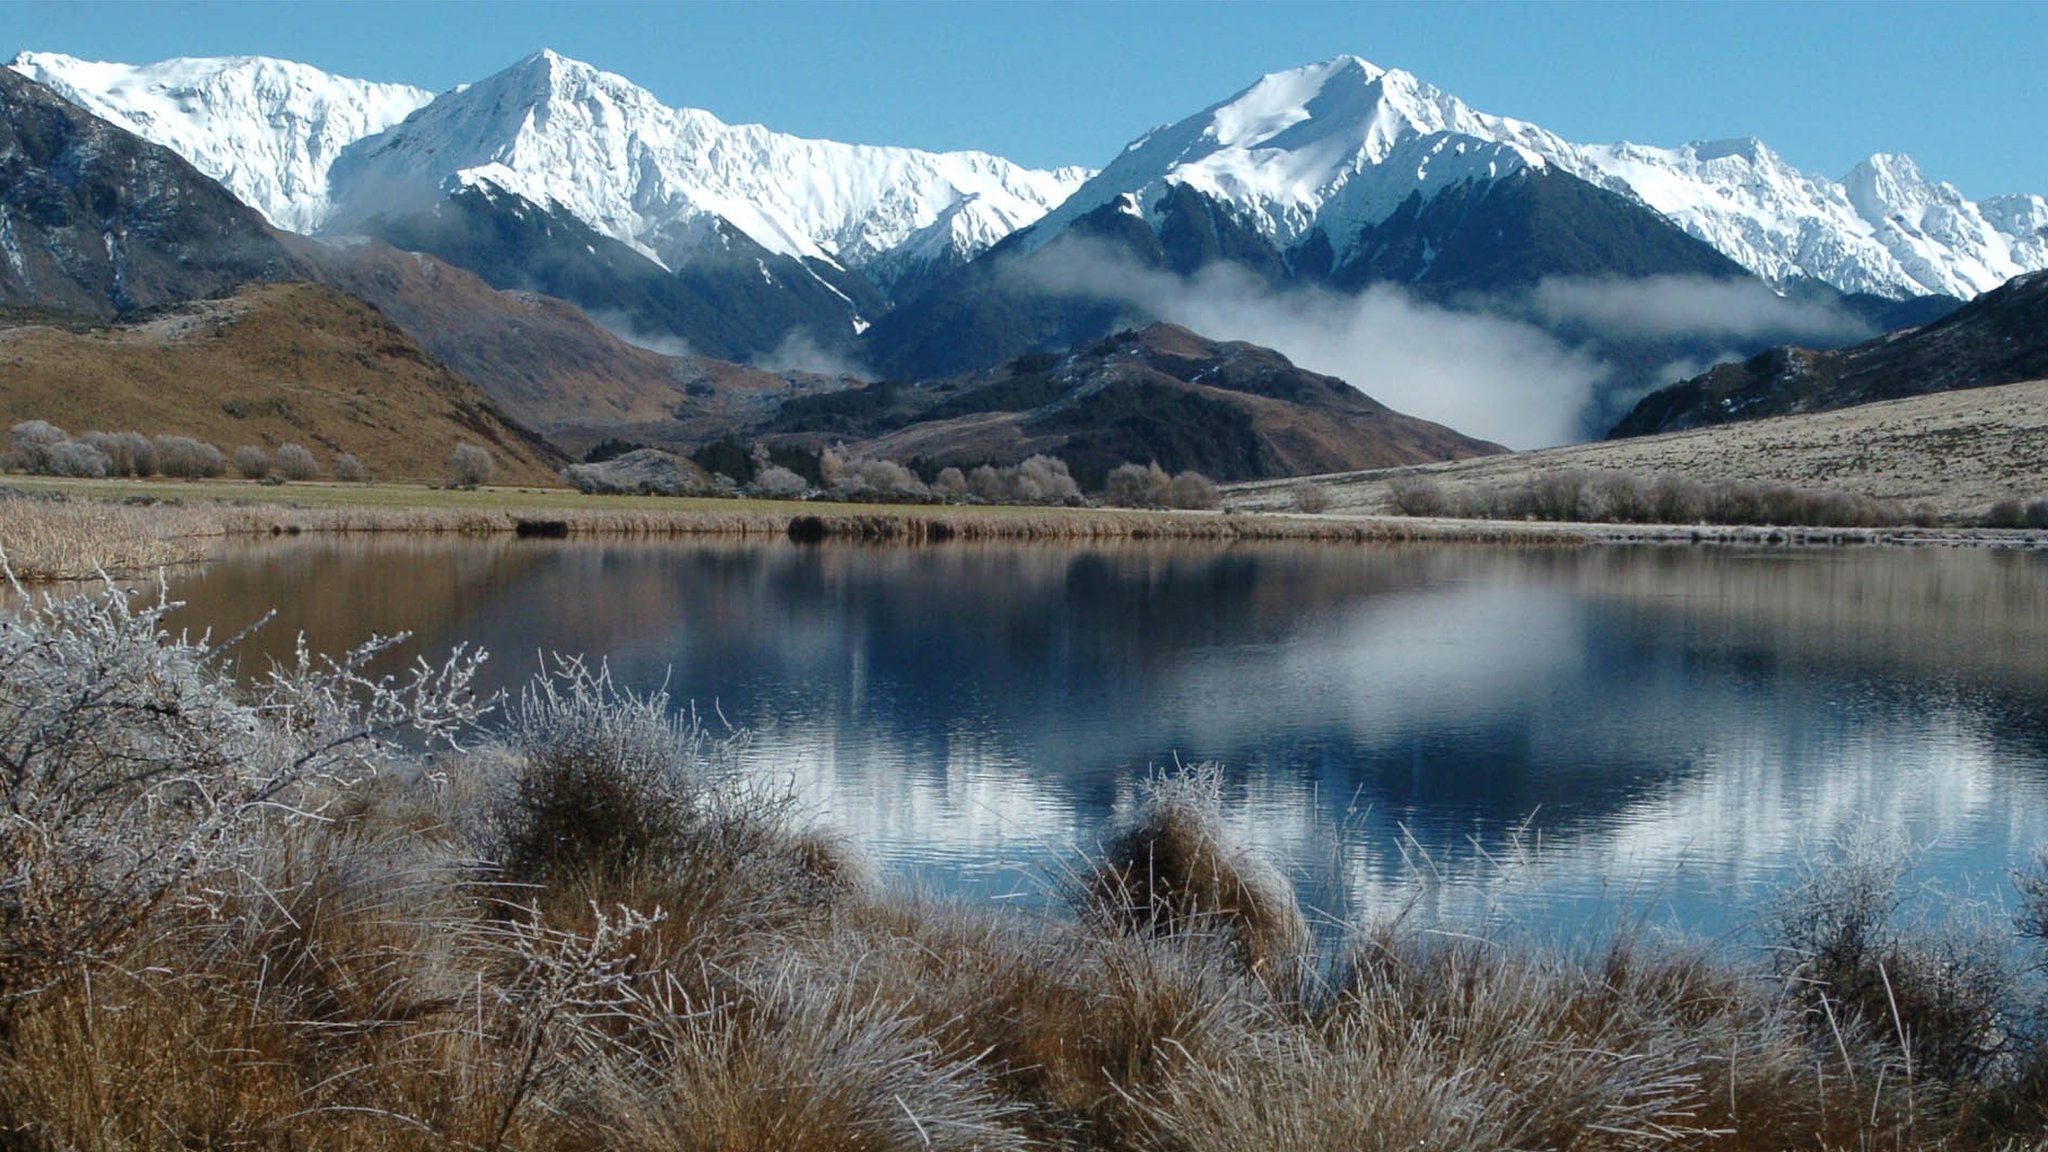 The Southern Alps, New Zealand